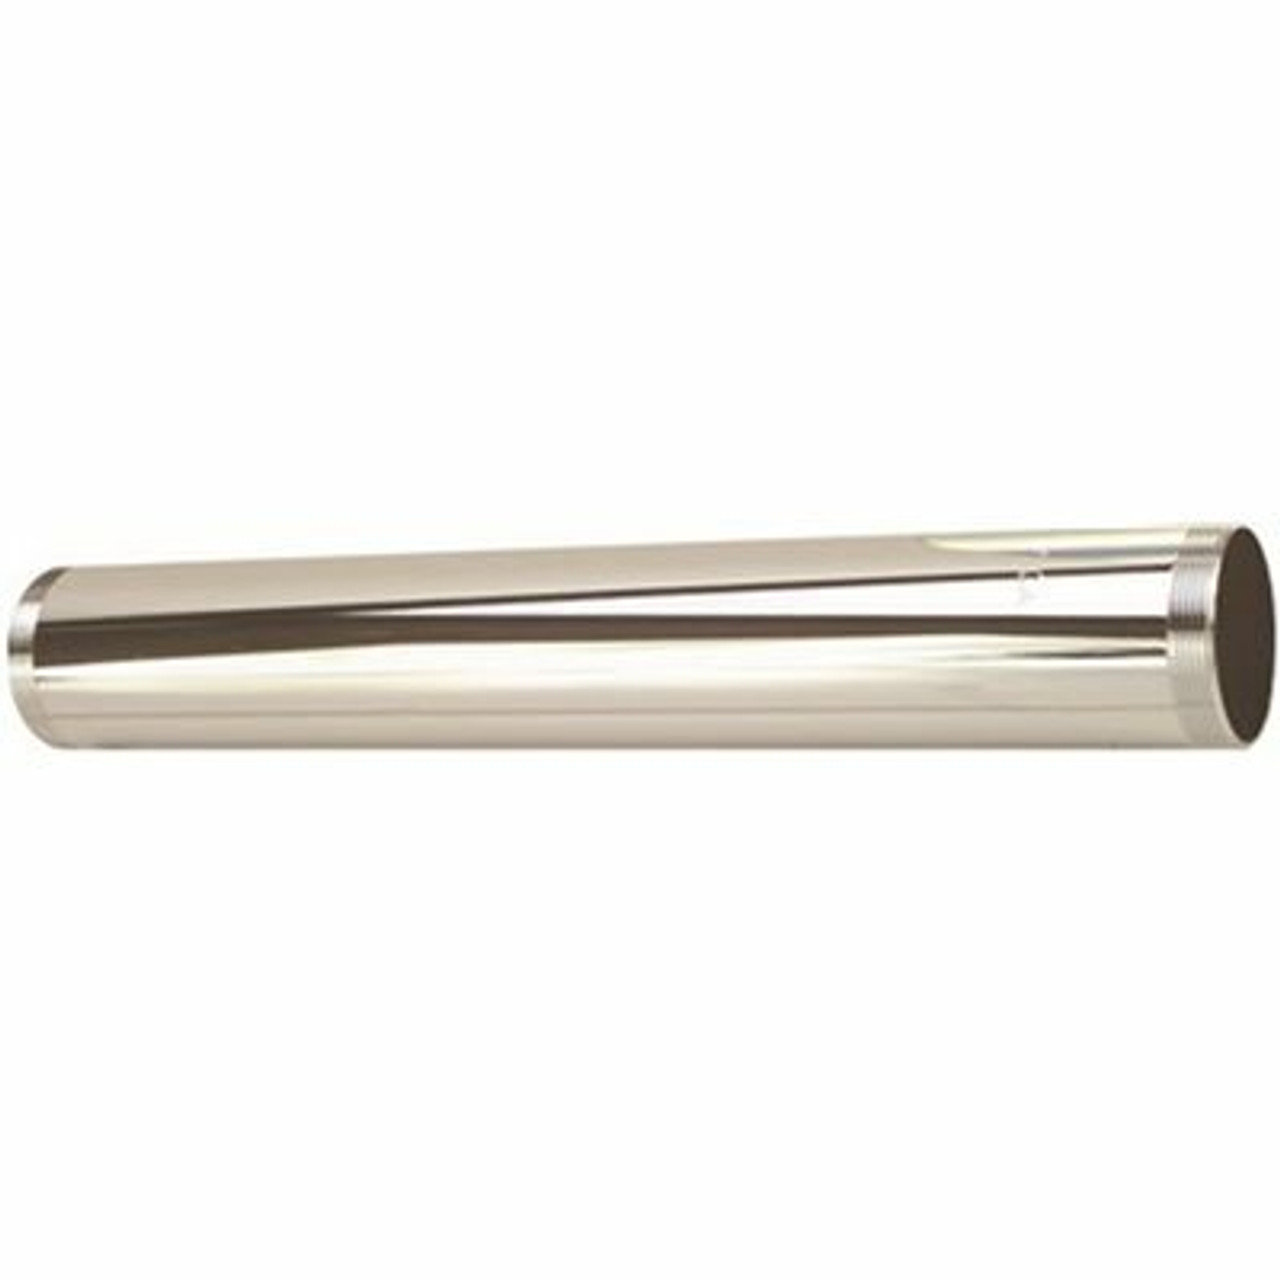 Premier Brass Tailpiece With Threaded Ends, Chrome-Plated, 17-Gauge, 1-1/2 X 8 In.